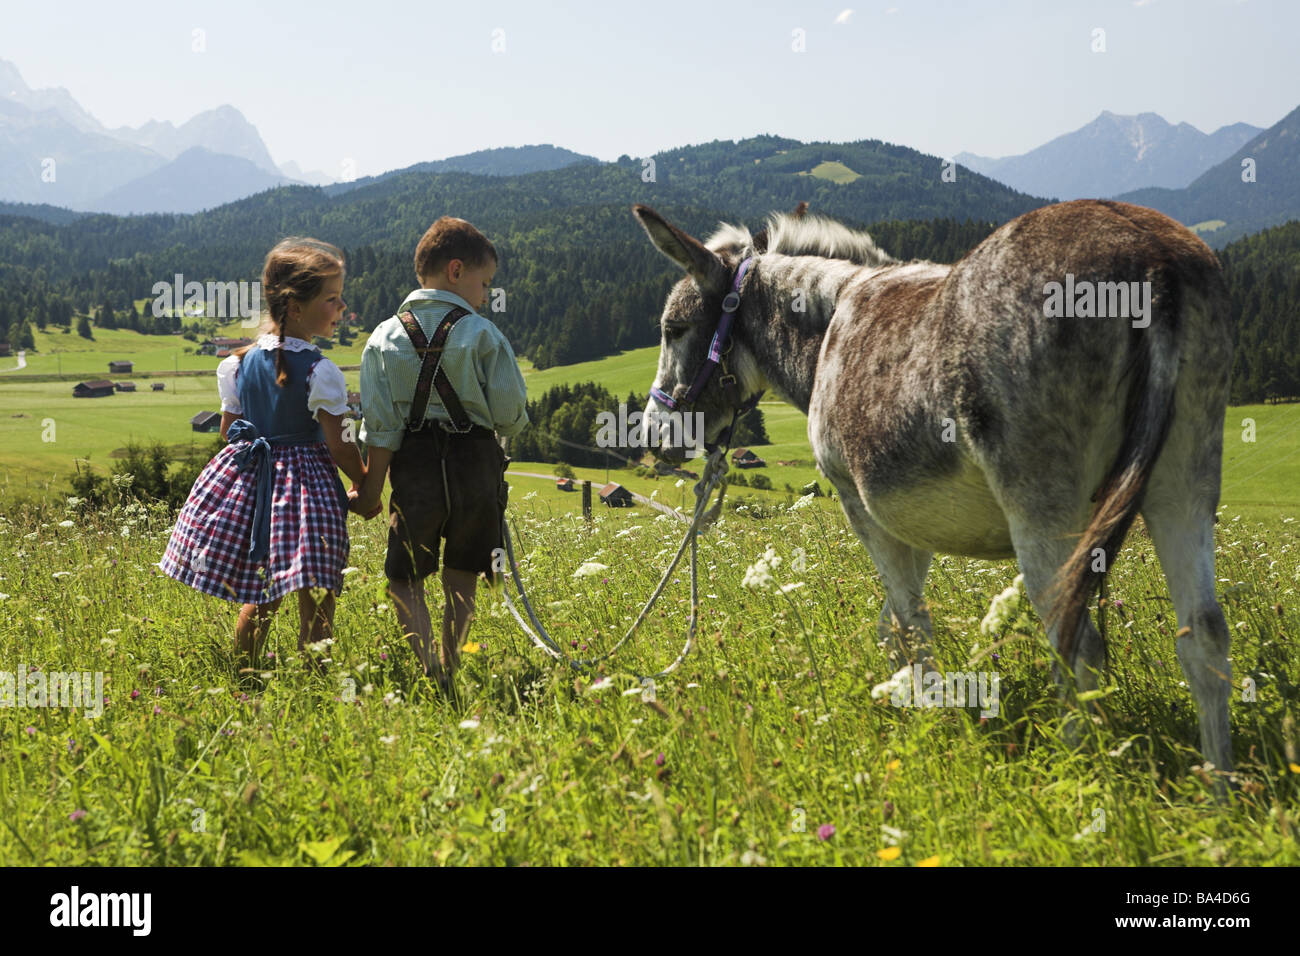 Highland-shaft meadow boy girls official dress donkeys back-opinion leads series mountains mountain-meadow people 5-10 years Stock Photo